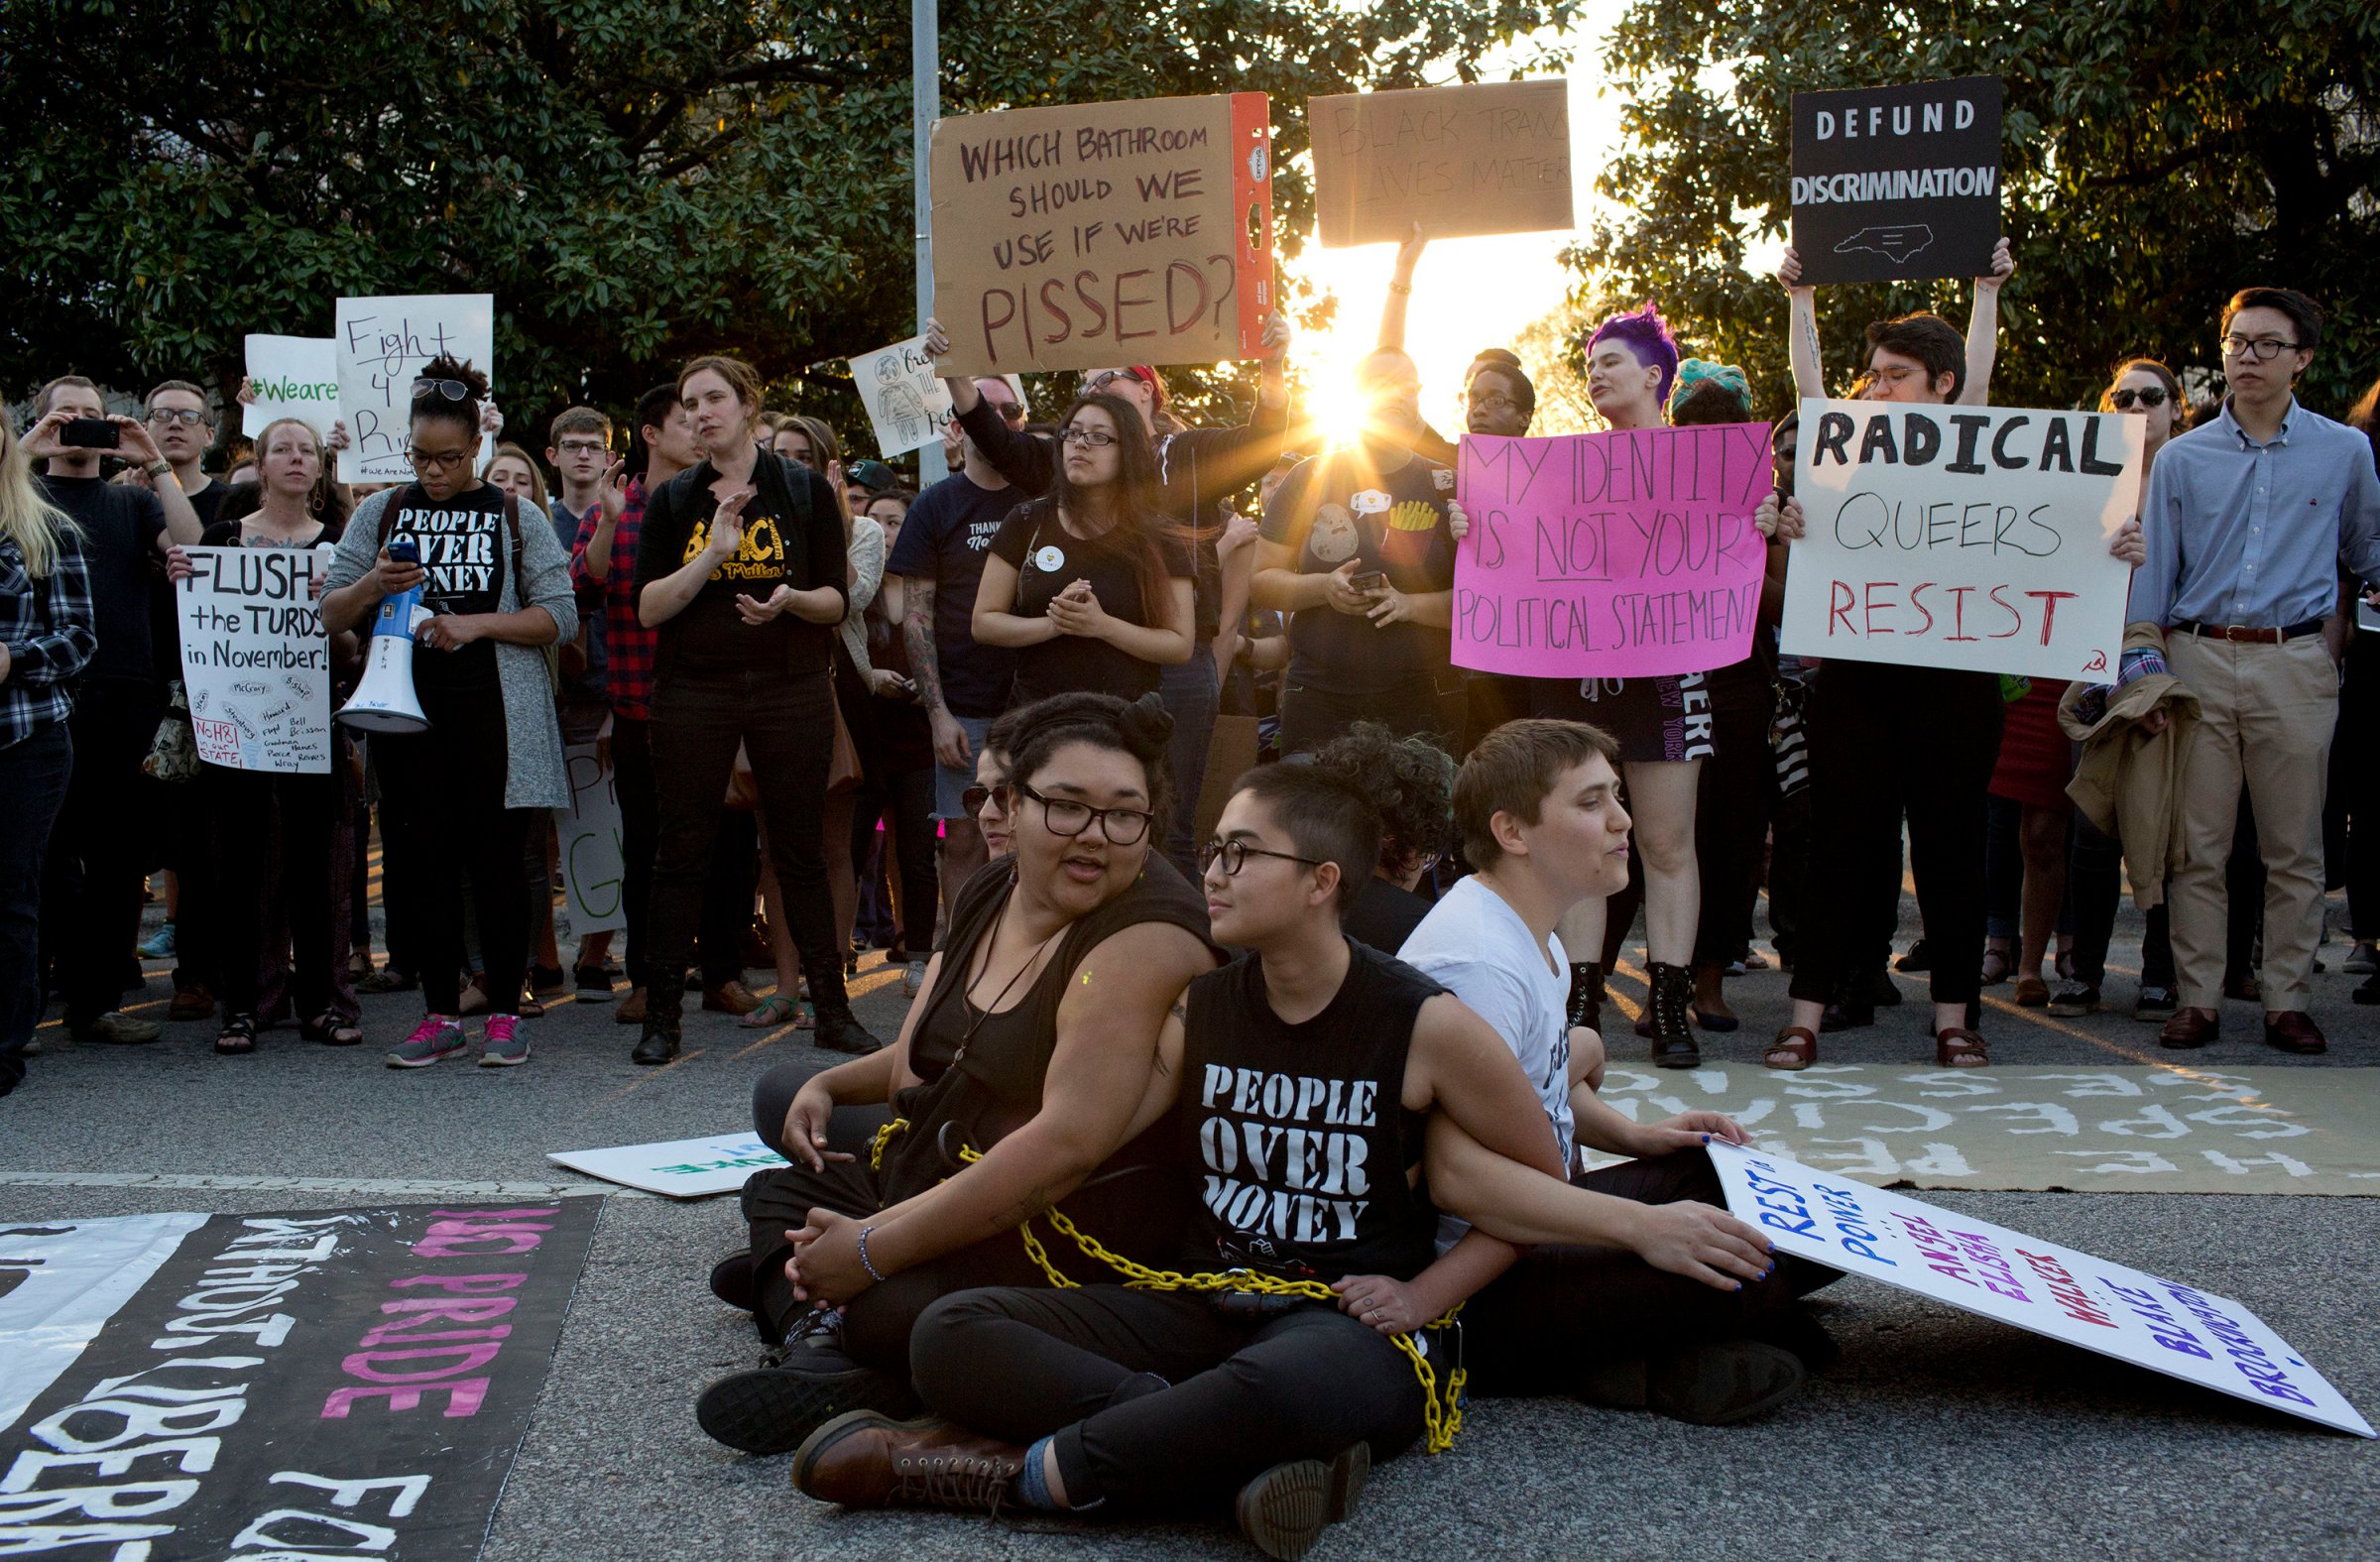 Front from left, demonstrators Jess Jude, Loan Tran and Noah Rubin-Blose, sit chained together in the middle of the street during a protest against House Bill 2 outside of the Governor's Mansion in Raleigh, N.C., on March 24, 2016,.